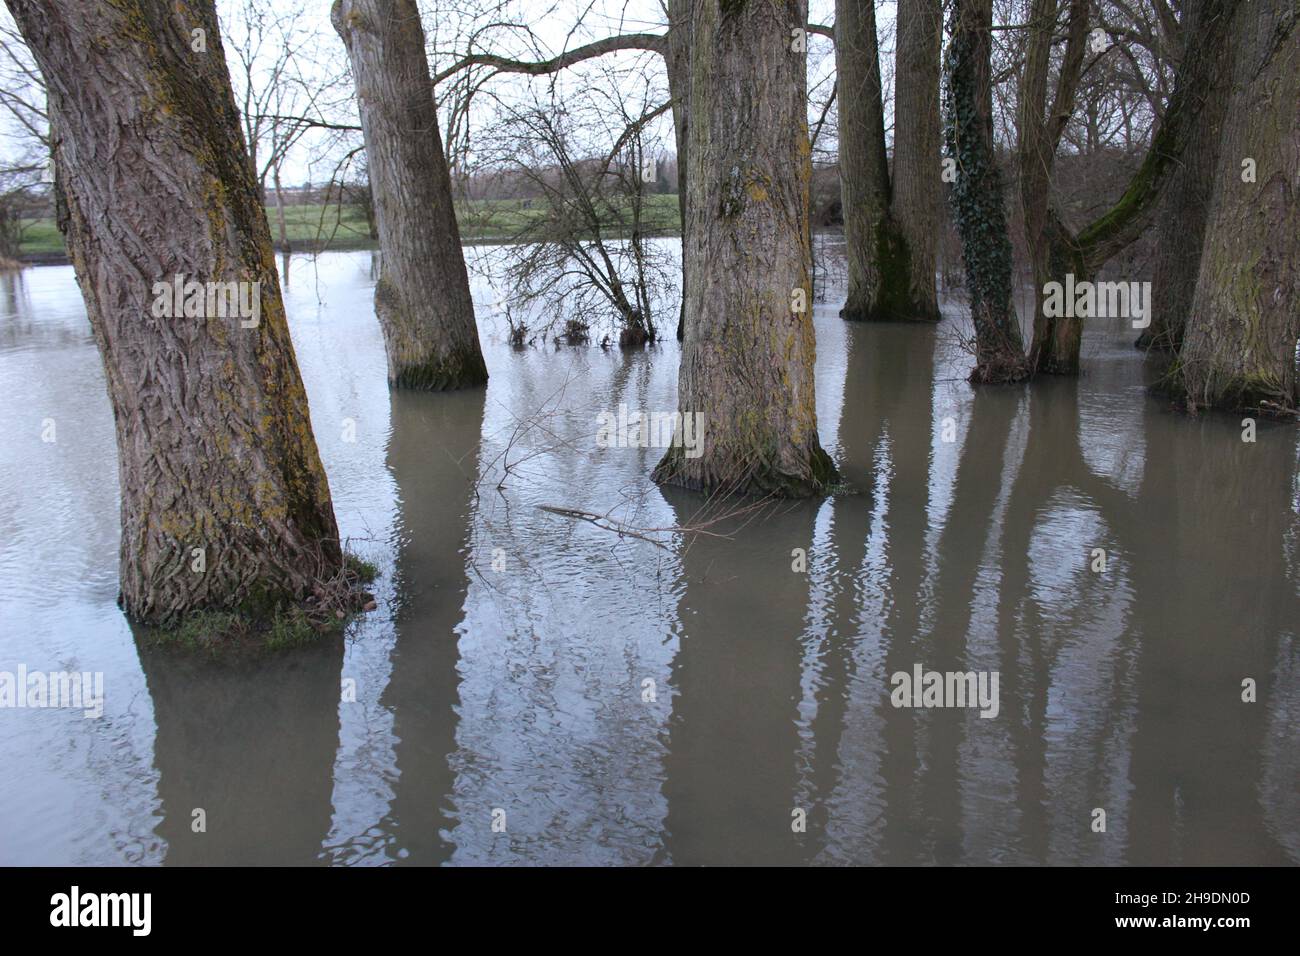 An overflowing River Thames floods tall deciduous trees in Port Meadow in winter (Oxford, England) Stock Photo